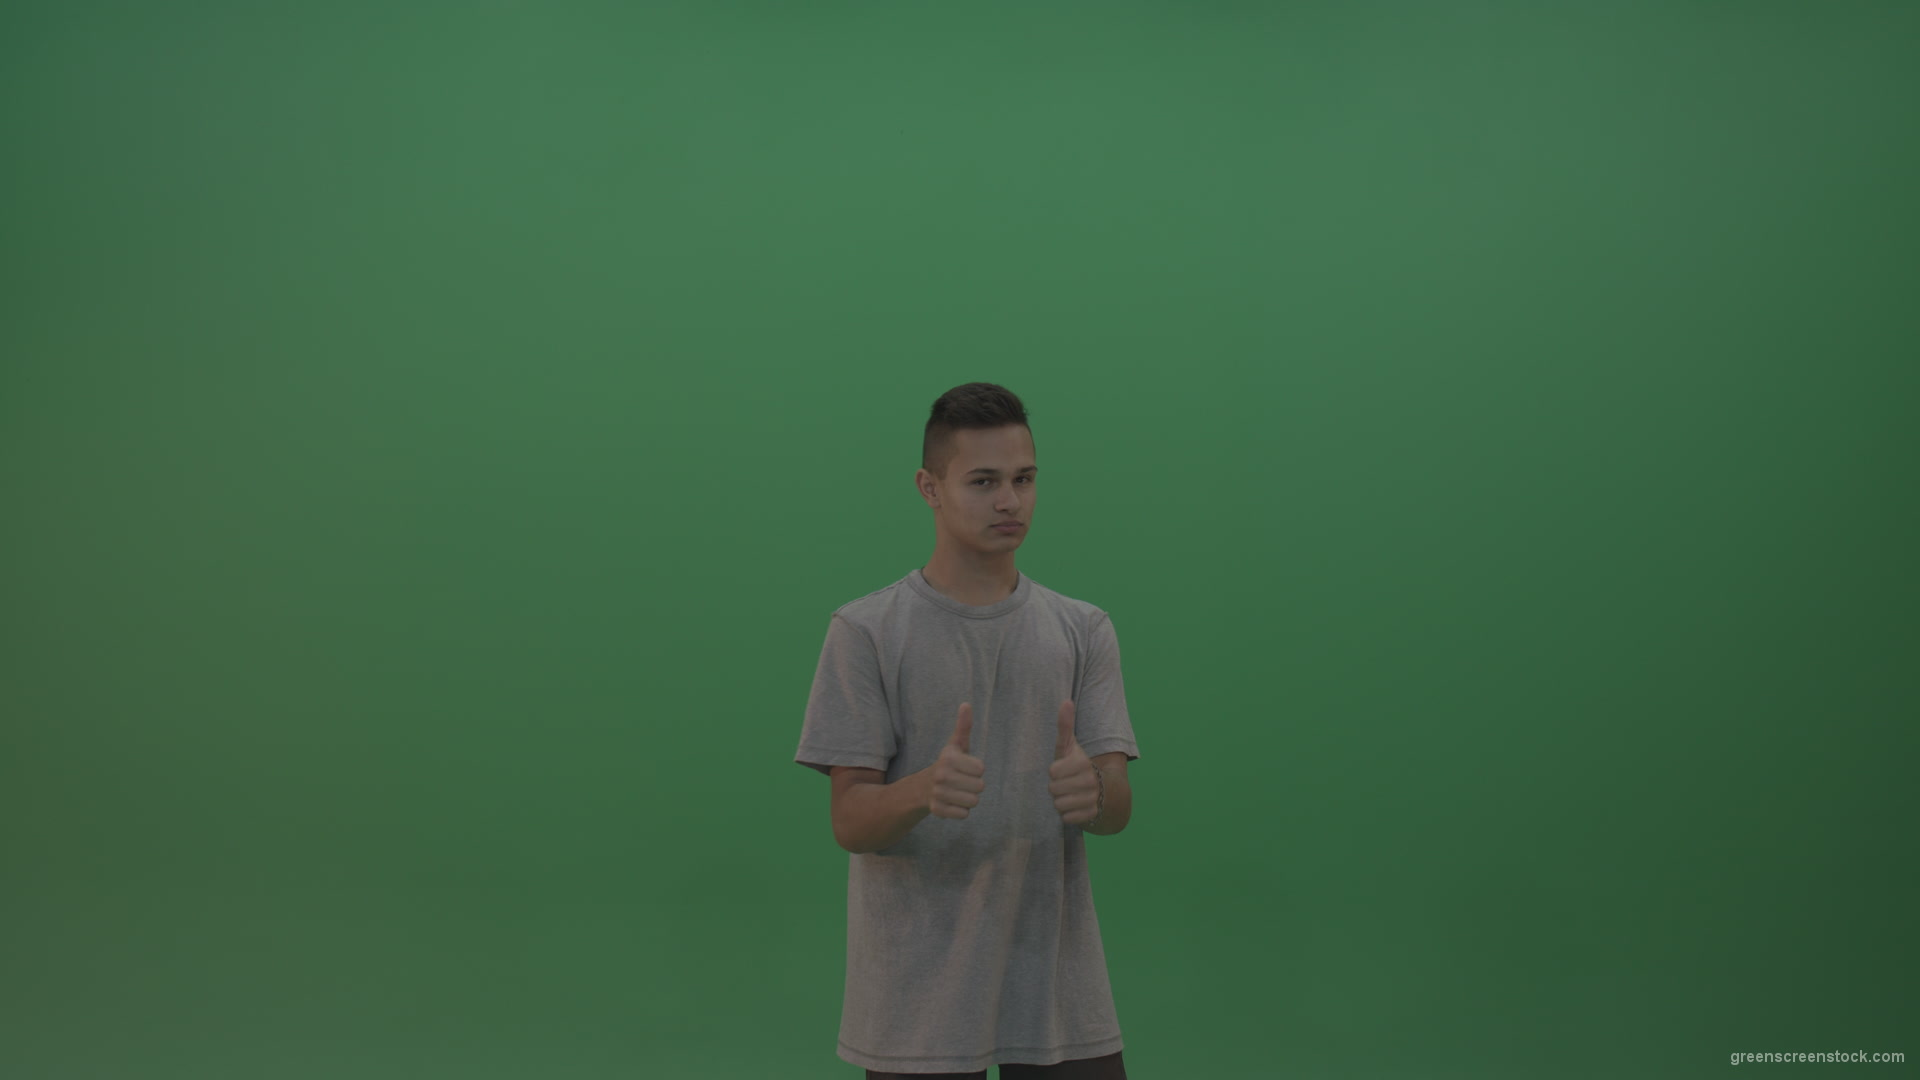 Boy-in-grey-wear-expresses-approval-by-giving-thumbs-up-over-green-screen-background_007 Green Screen Stock